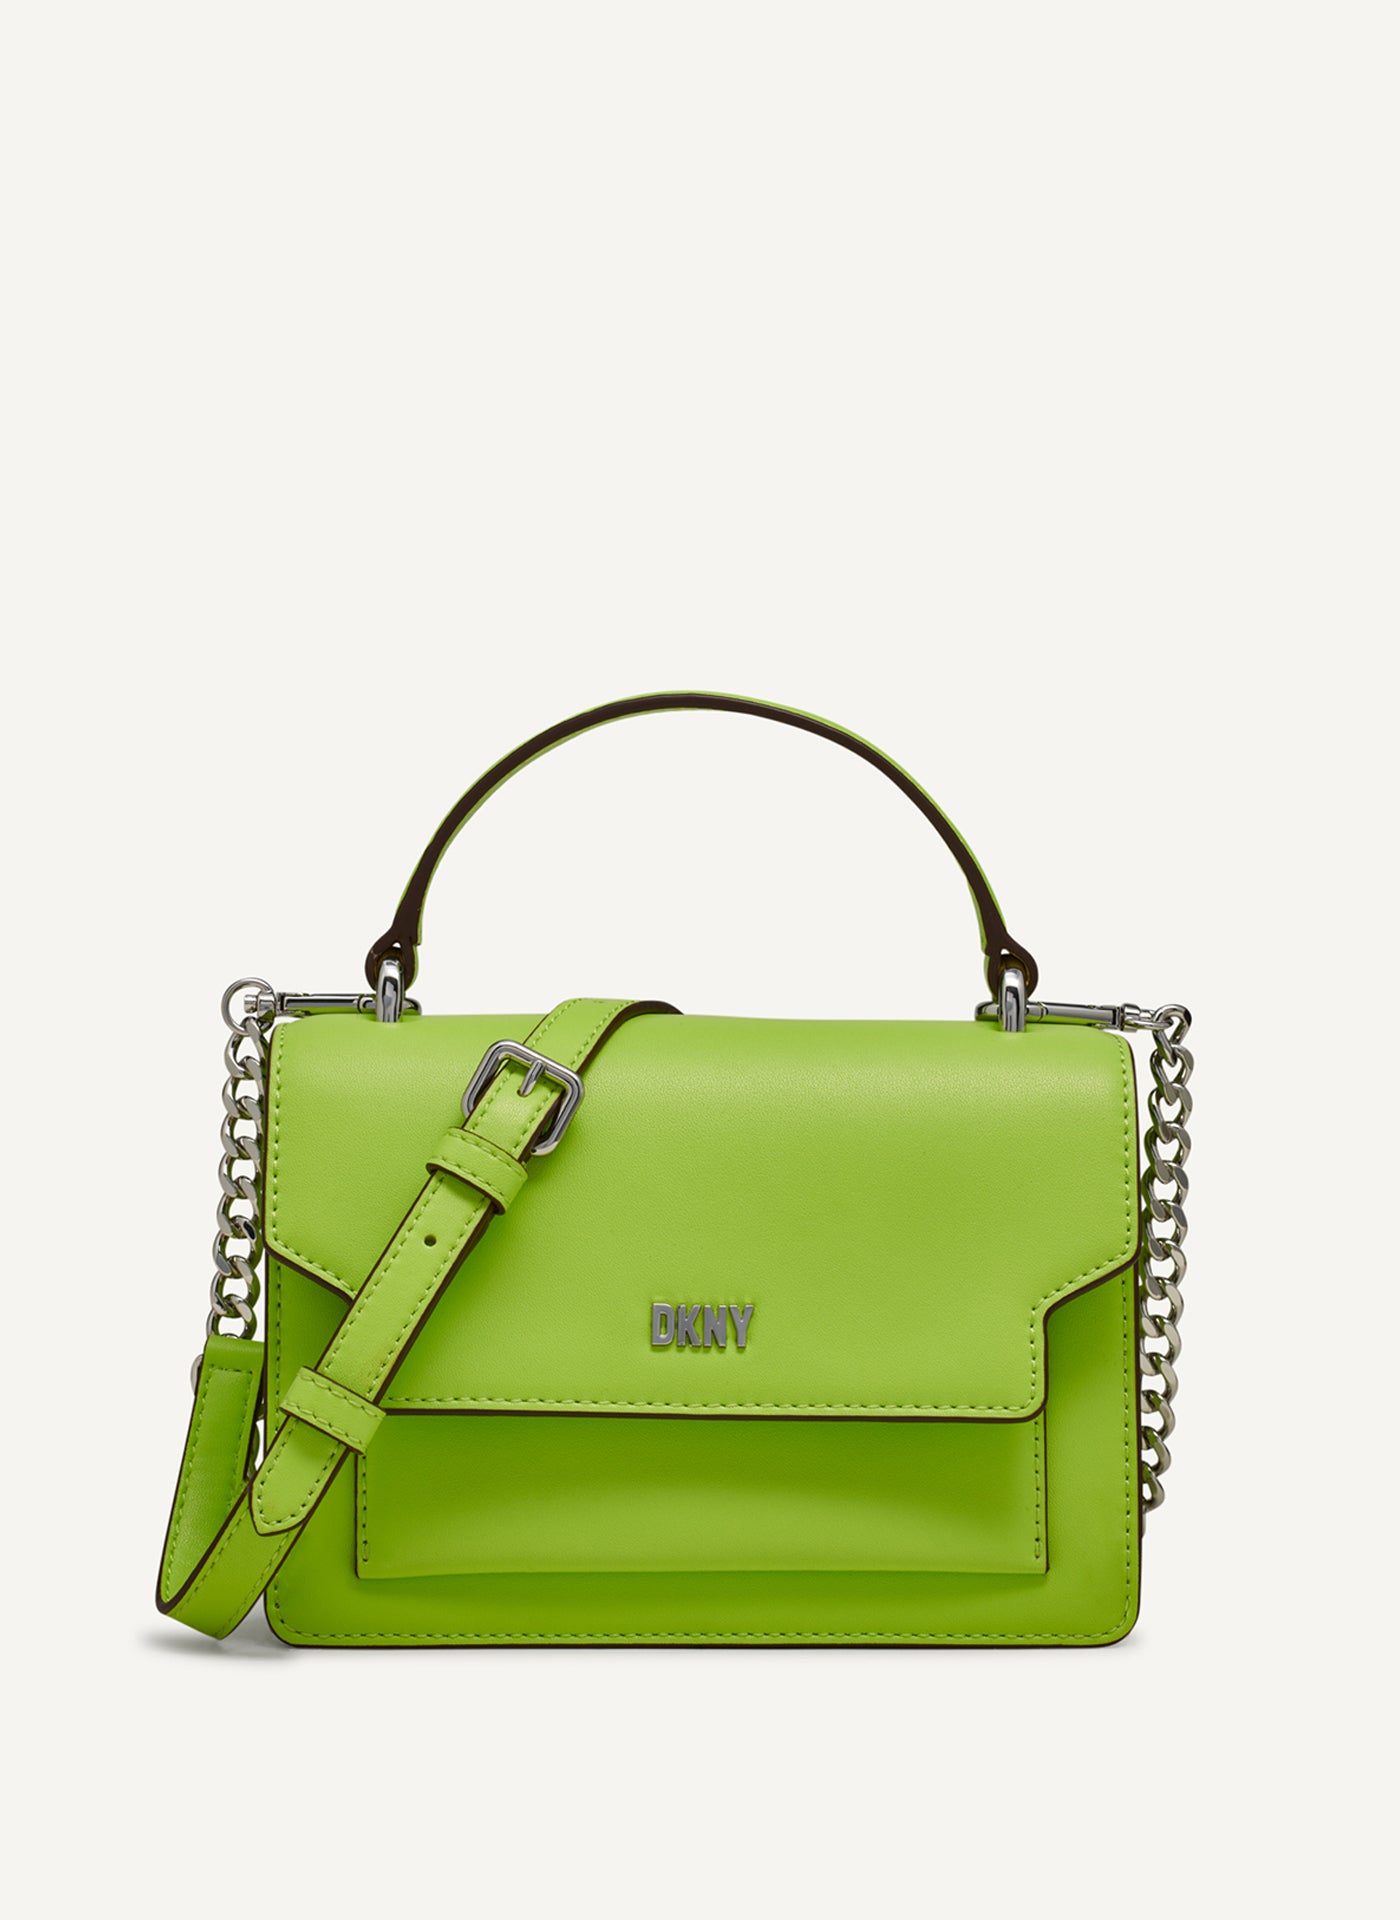 DKNY Millie Leather Top Handle Crossbody,Green